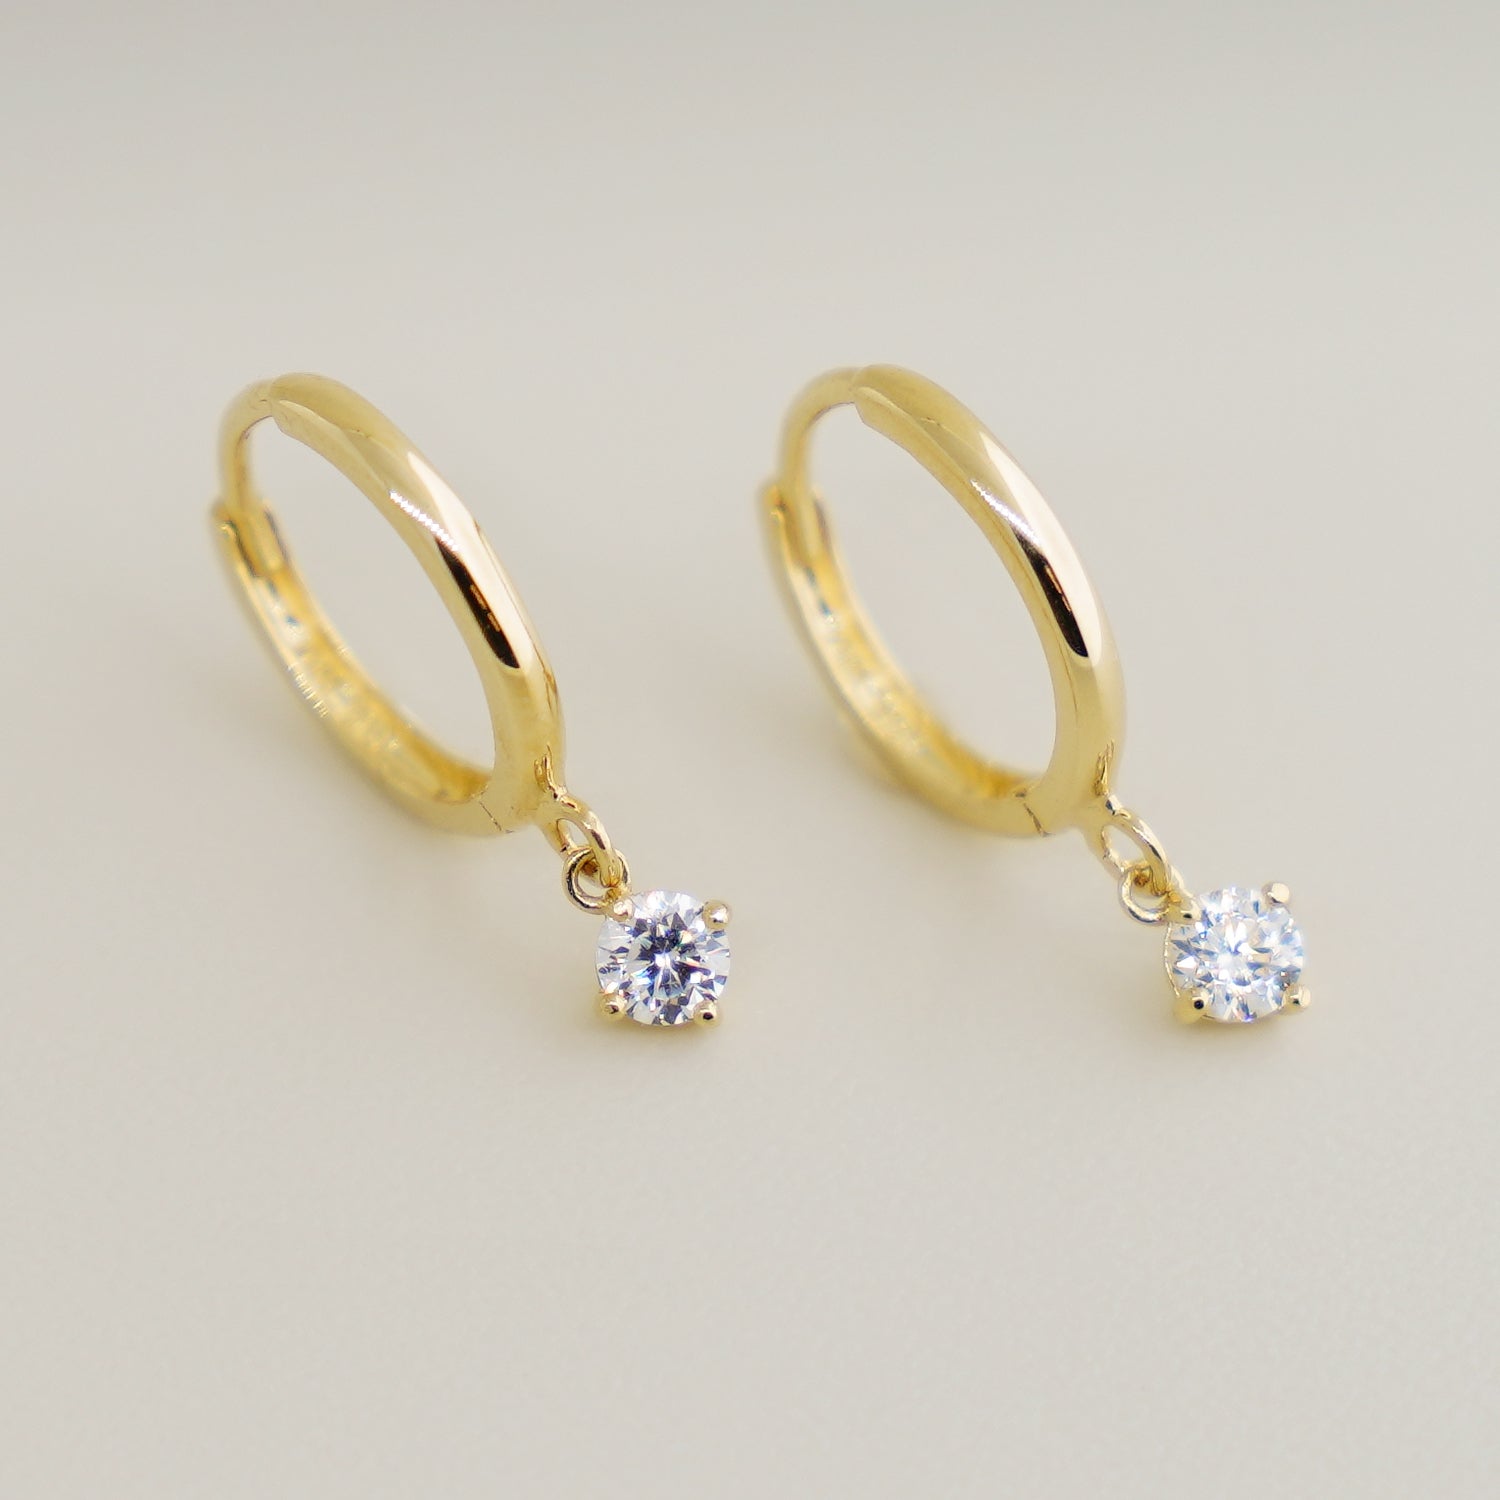 14K Solid Gold 3mm Round CZ Drop Earrings